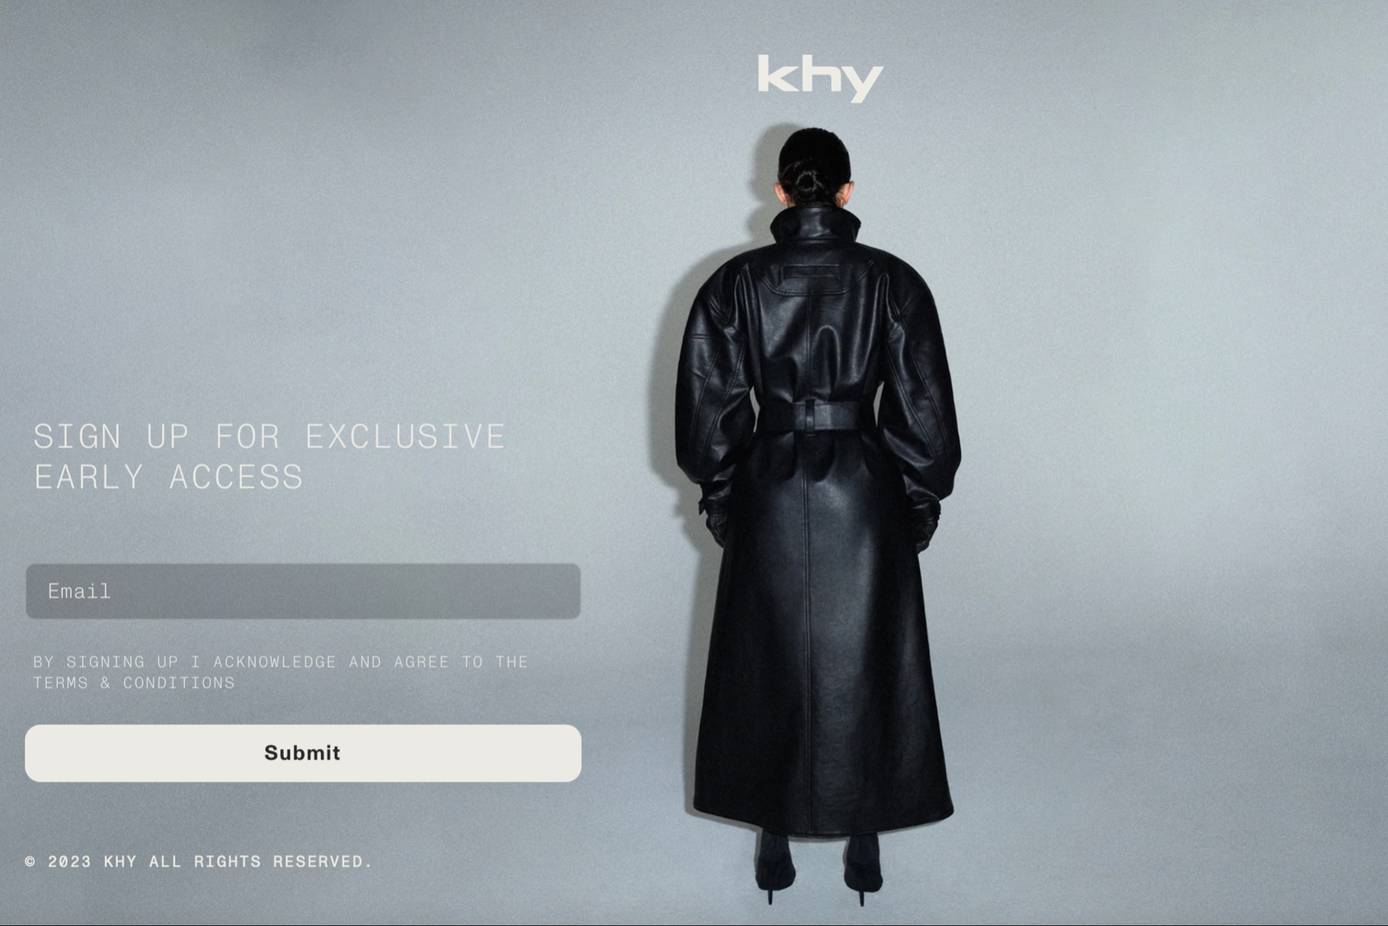 Kylie Jenner Launches Khy, a High-Fashion Clothing Line